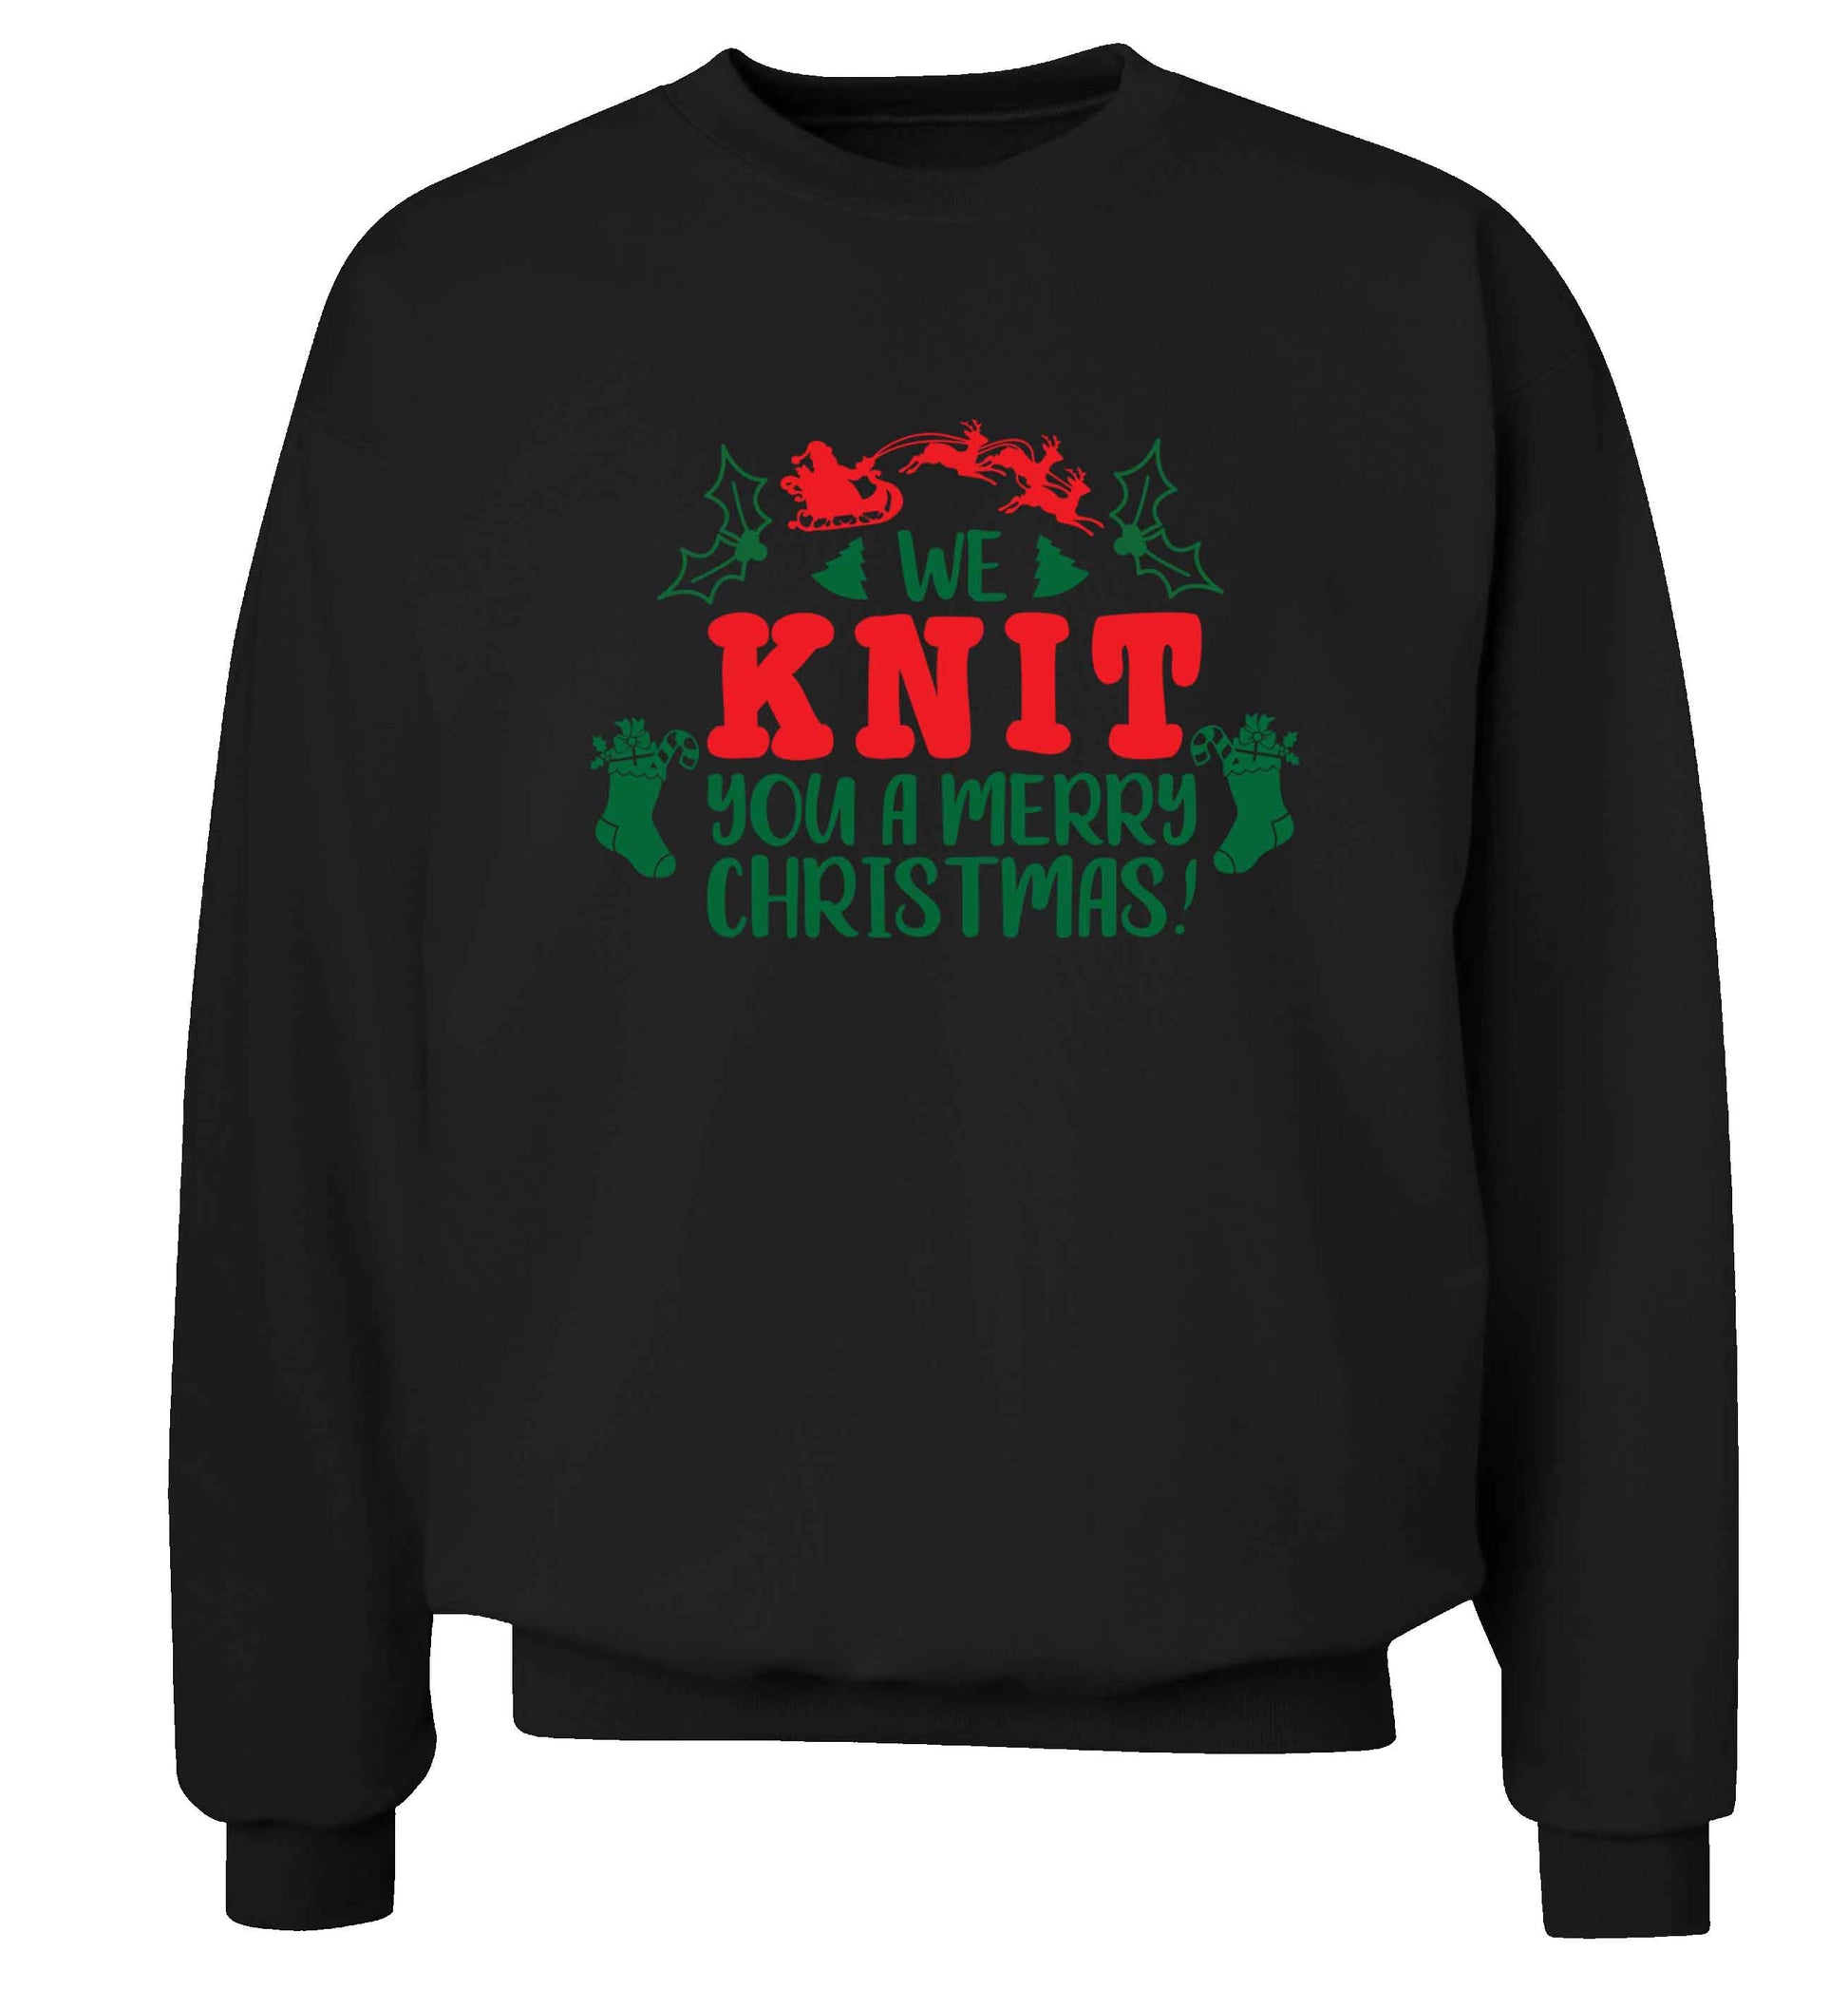 We knit you a merry Christmas Adult's unisex black Sweater 2XL